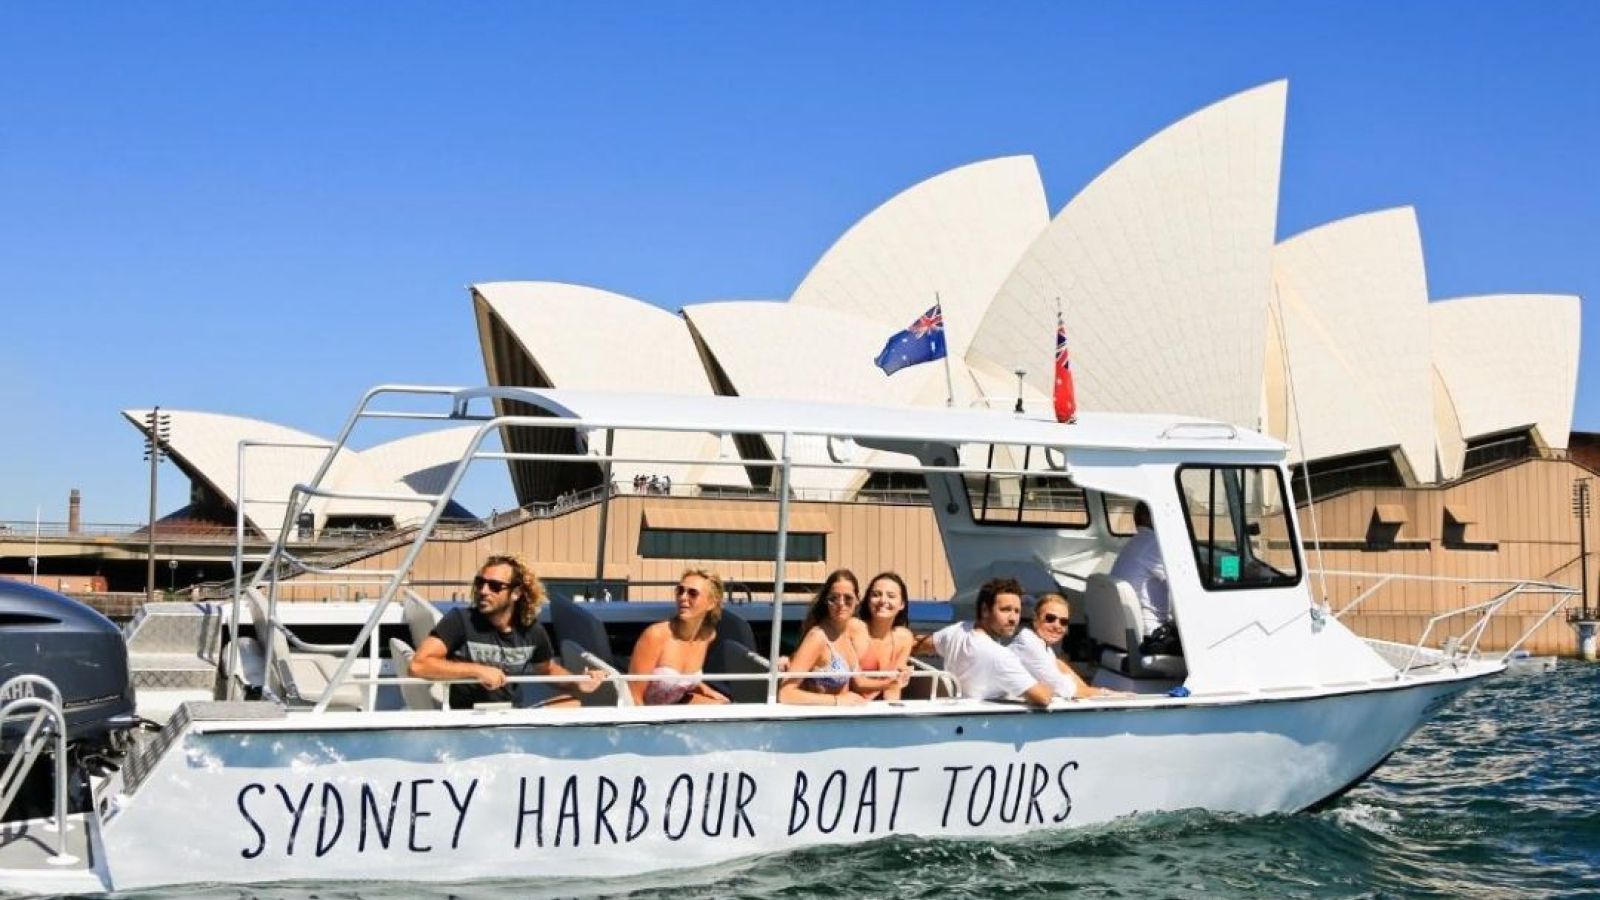 Sydney Harbour Boat Tours - Iconic bays and beaches boat cruise